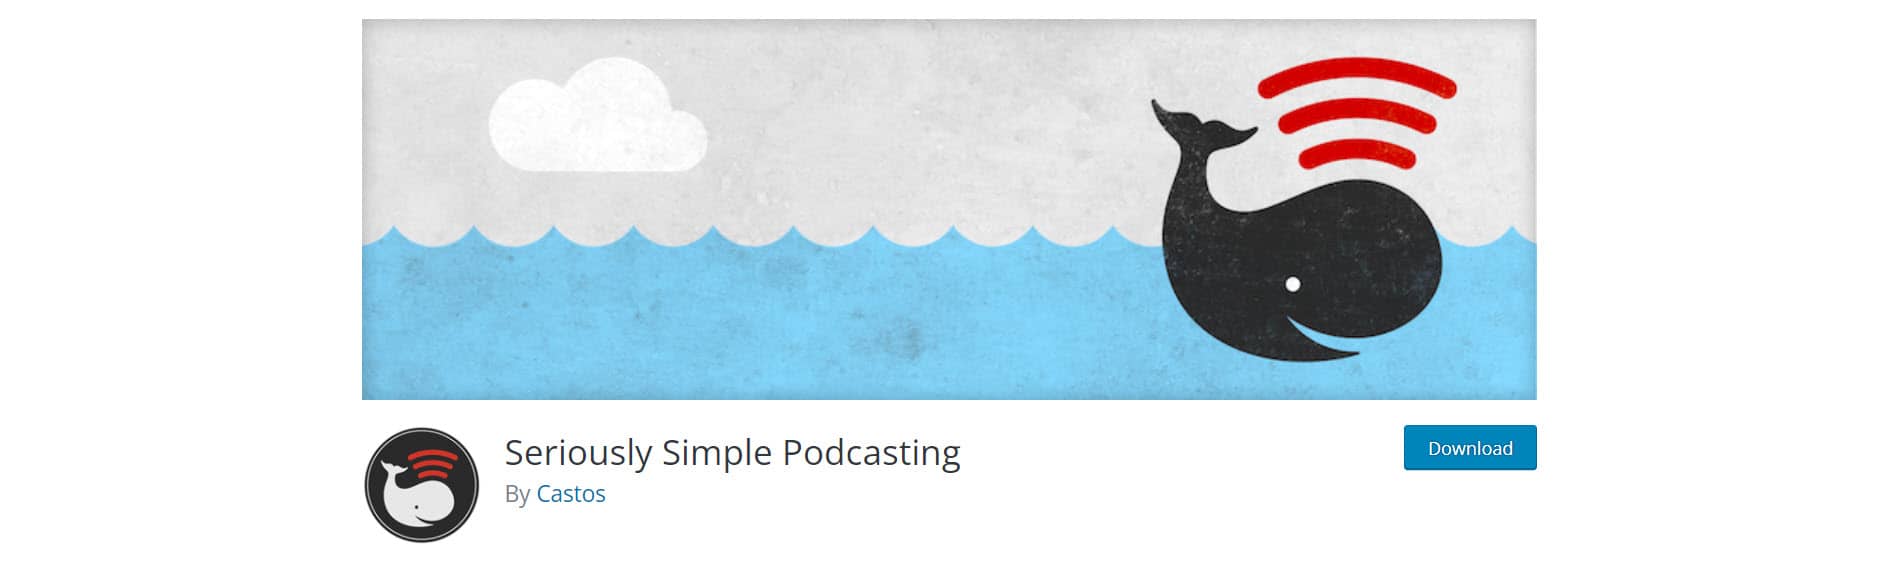 seriously simple podcasting